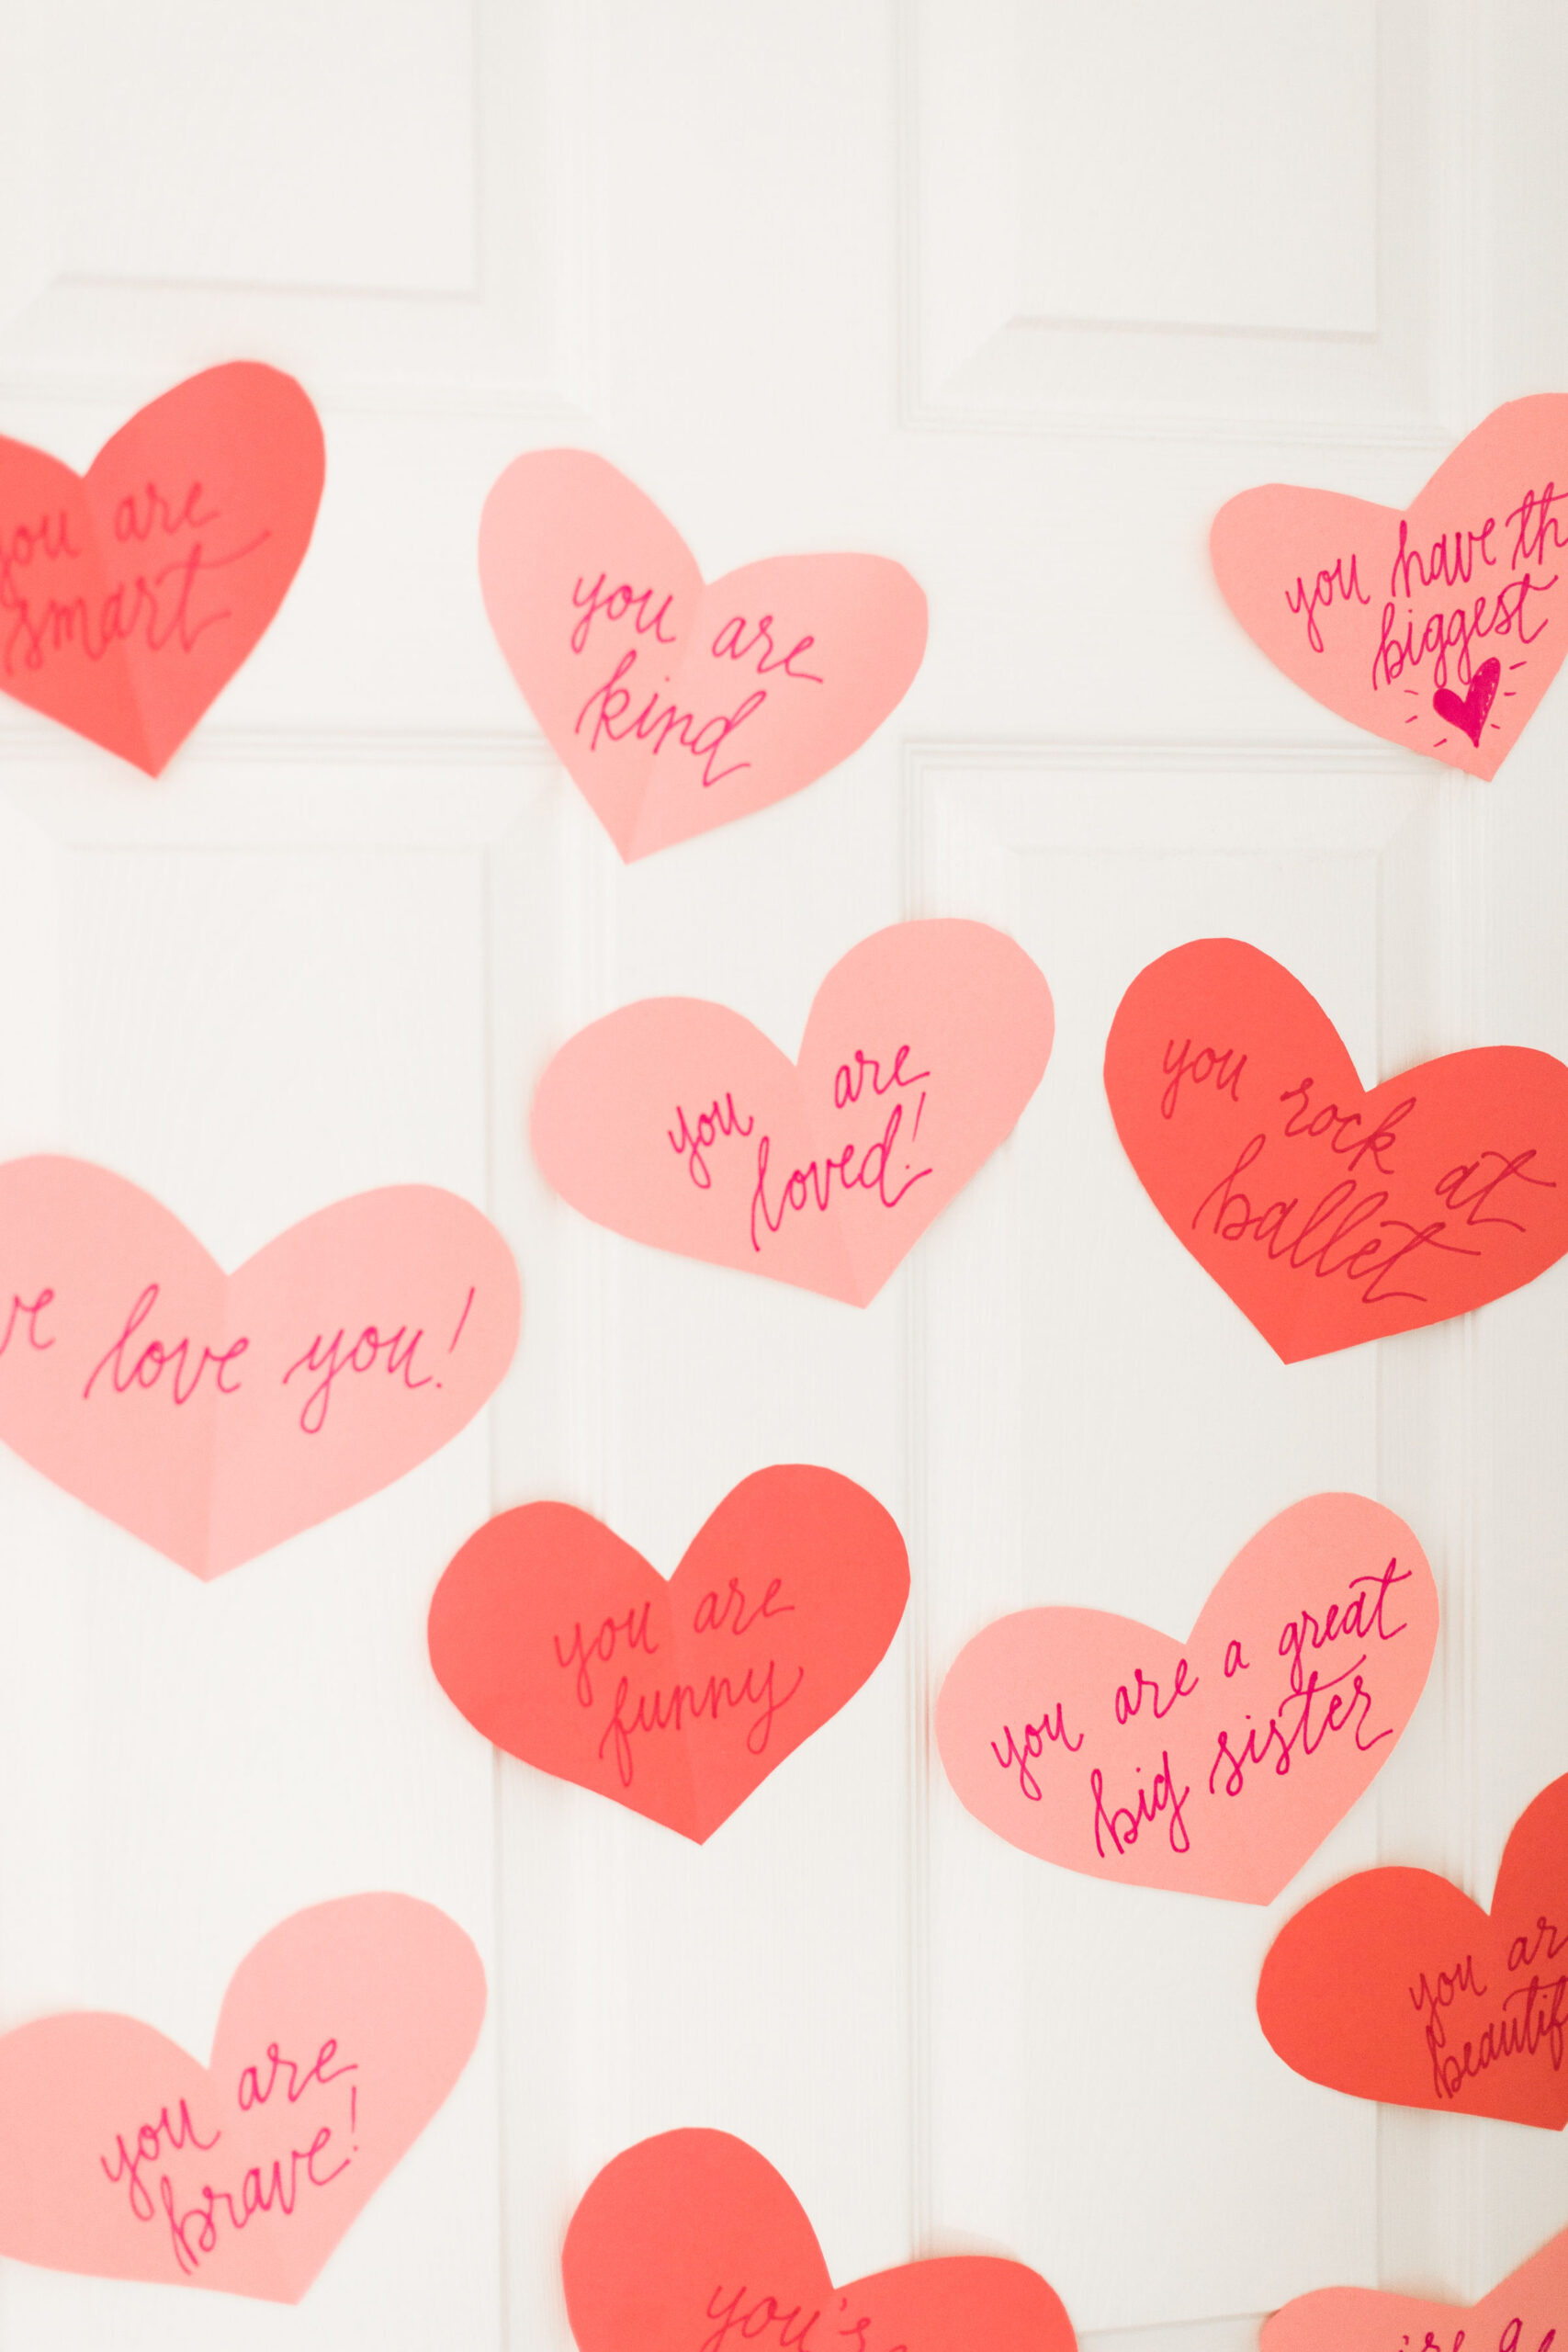 DIY “heart attack” - Leave Love Notes for your Valentine around the house or on your kids bedroom door so that they wake up to a sweet surprise of hearts!